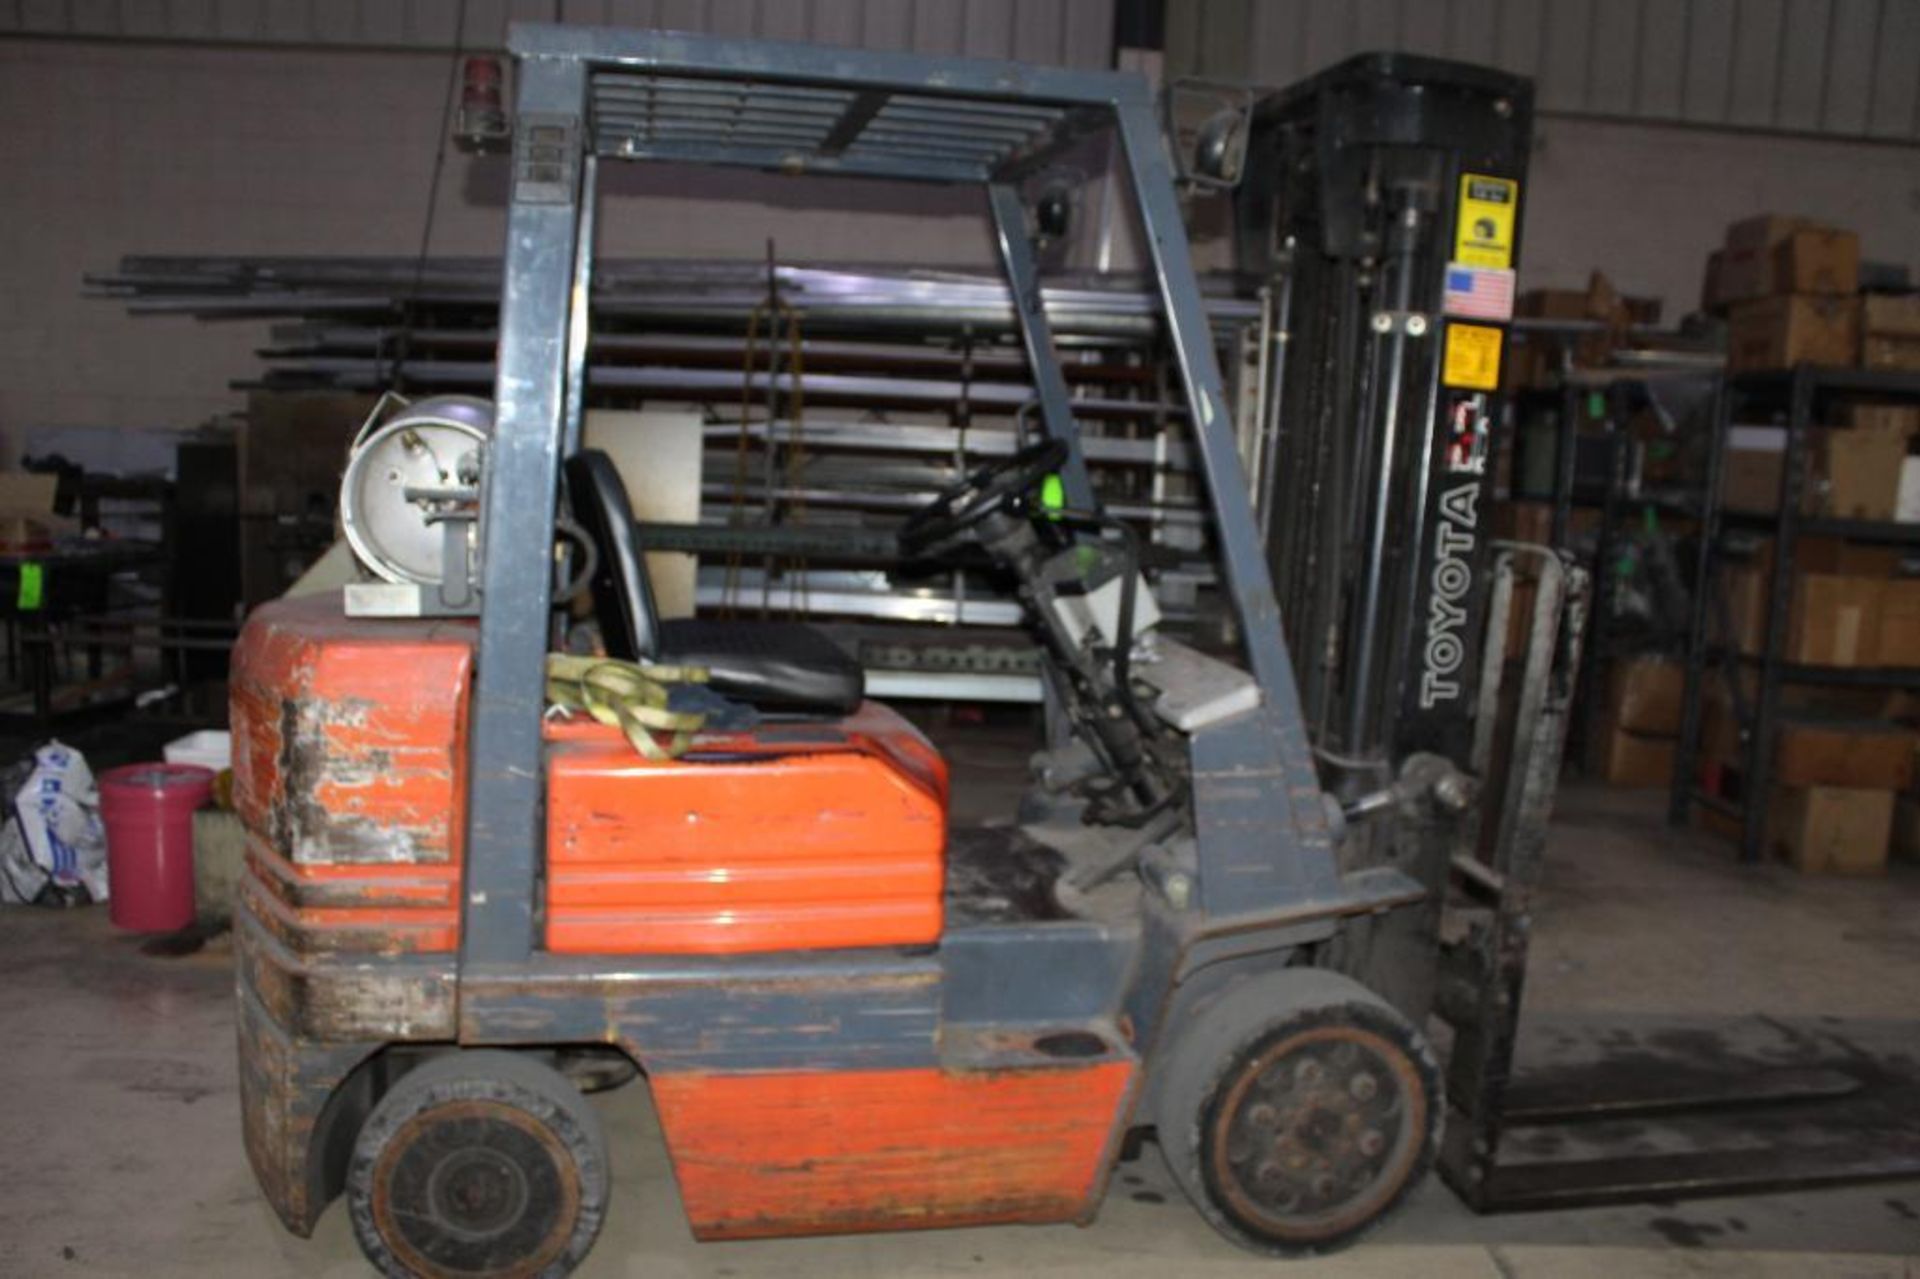 Toyota 4000LB. Propane Forklift Triple Stage Mast Model 5FG025 With 4'Forks - Delayed Removal - Image 7 of 18